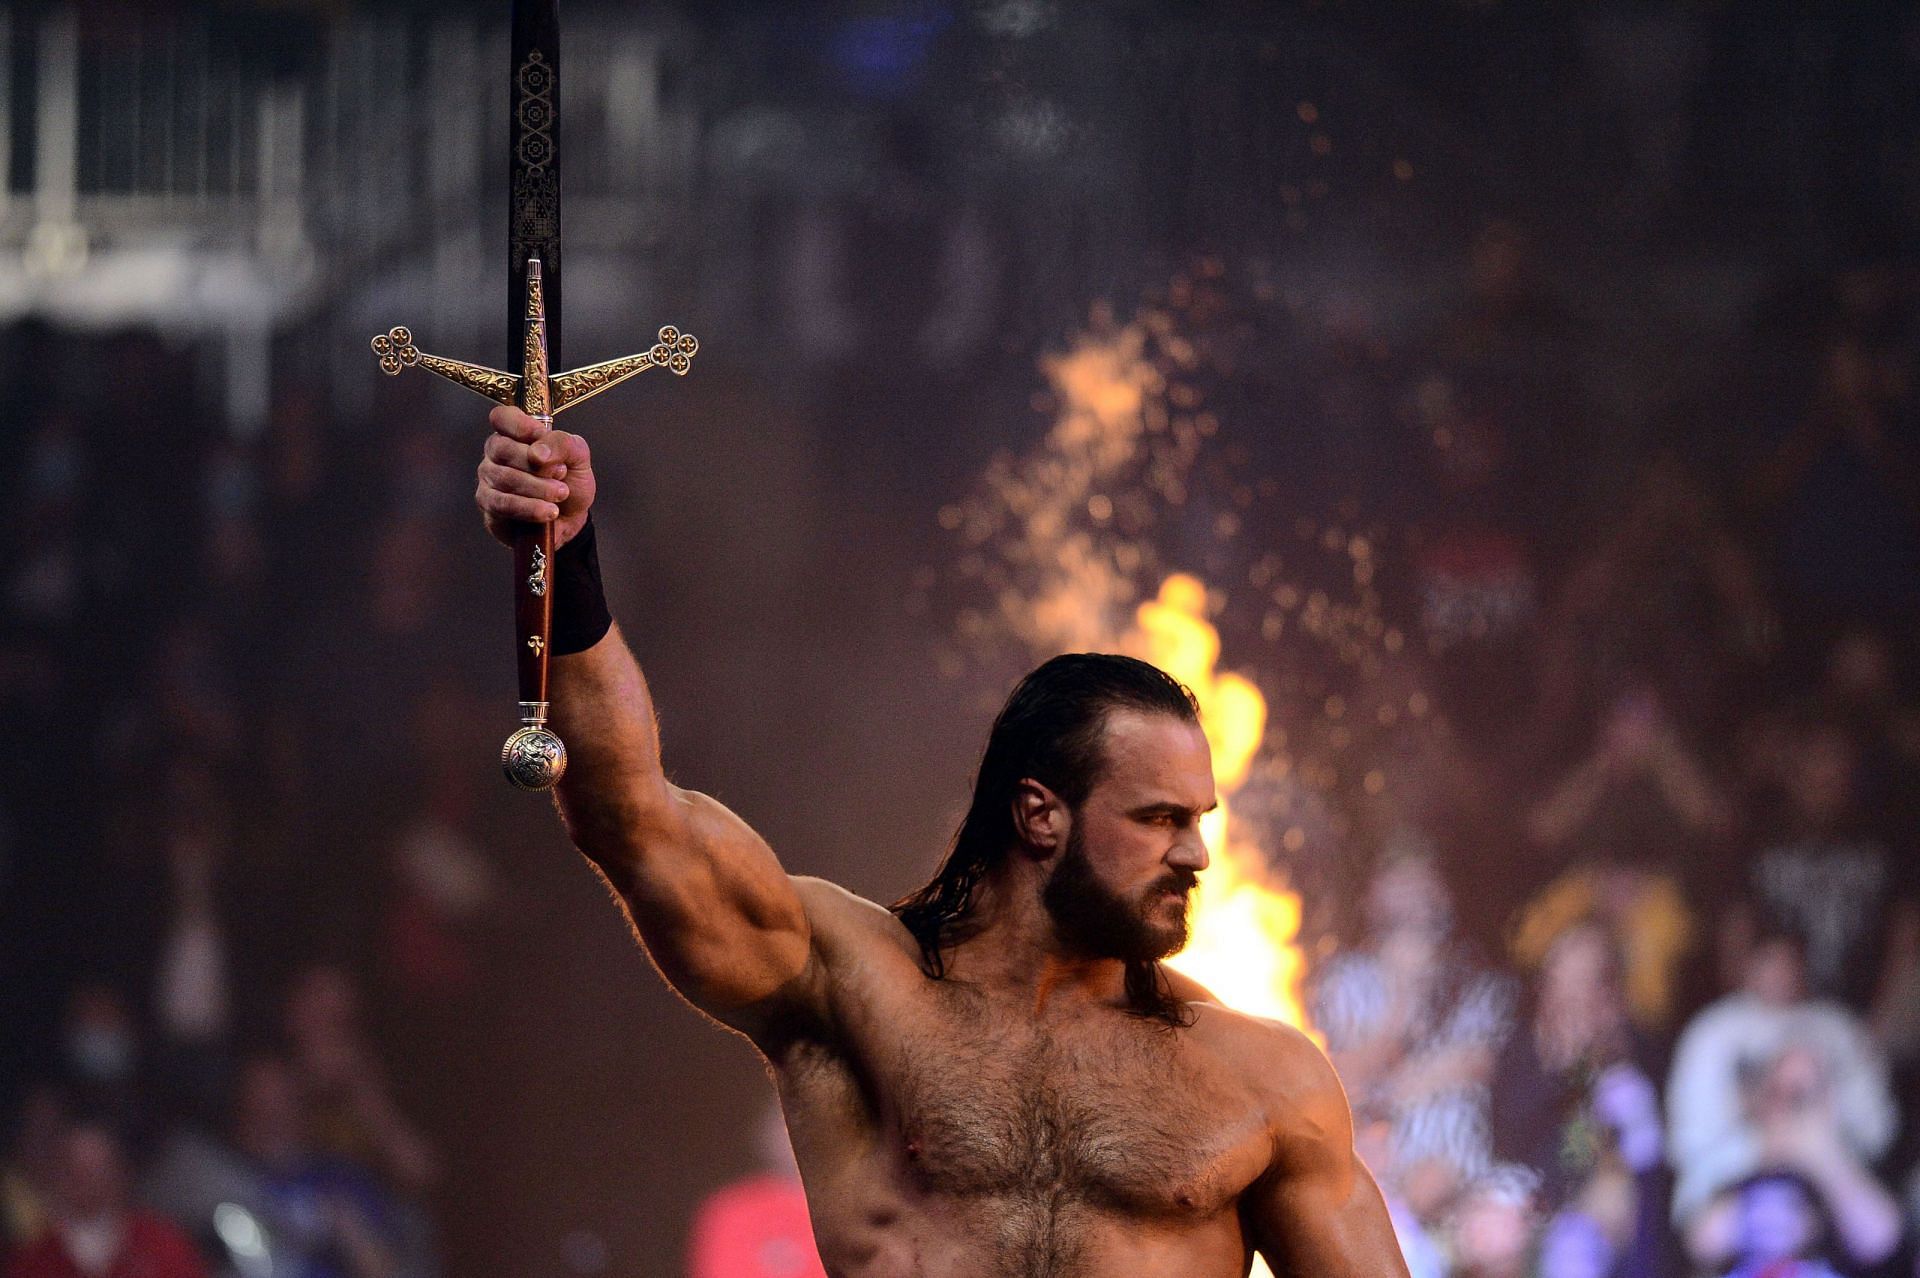 Will Drew McIntyre conquer the castle?